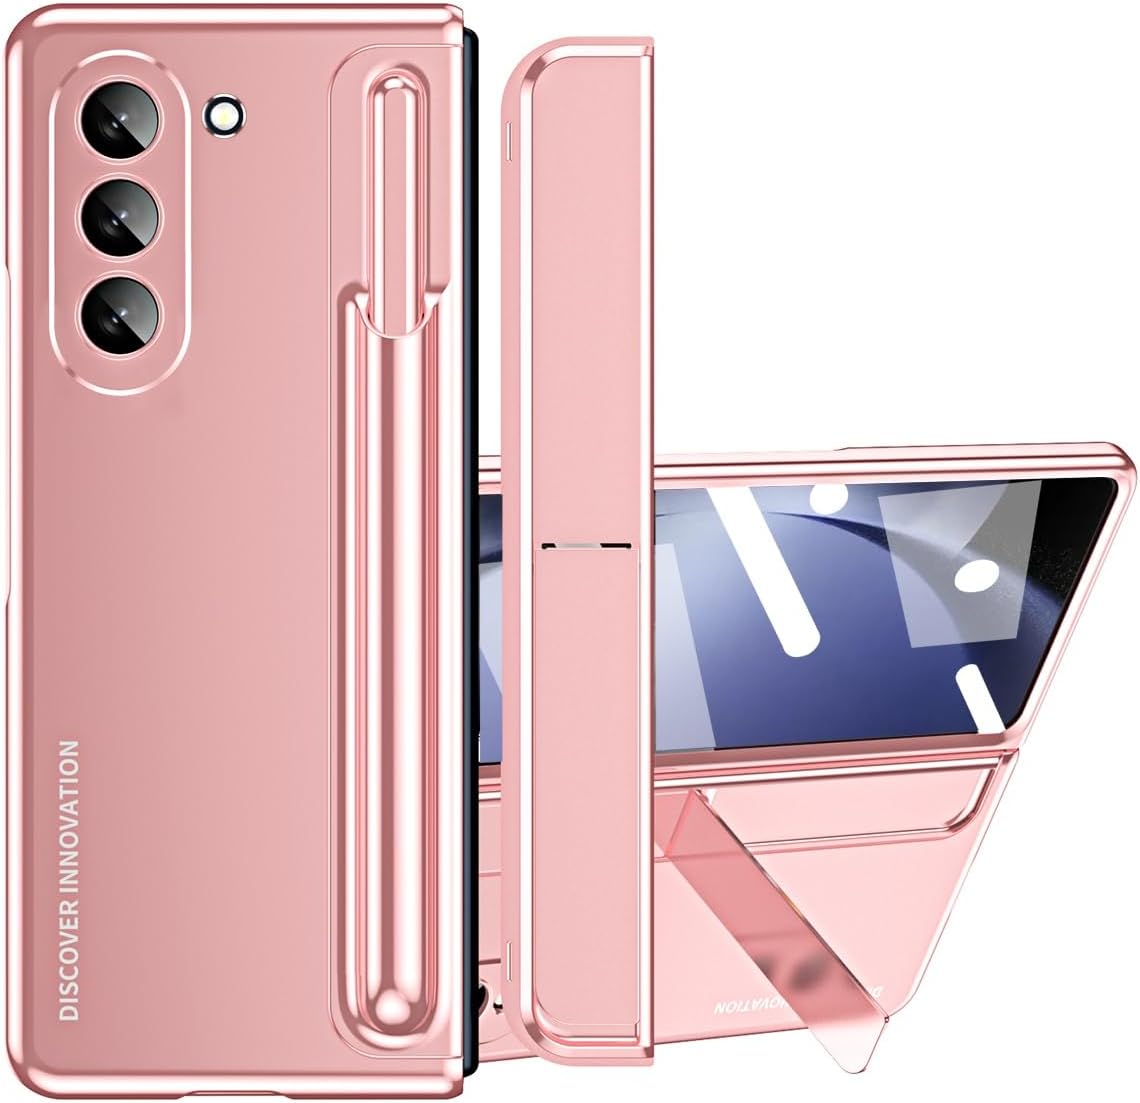 Mobile cover, Elegant Luxury Case Compatible with Samsung Galaxy Z Fold 5 Cover with One-Piece Plating Housing with Kickstand and Screen Protector with S-Pen, Anti-Scratches Case ( Color : Pink )